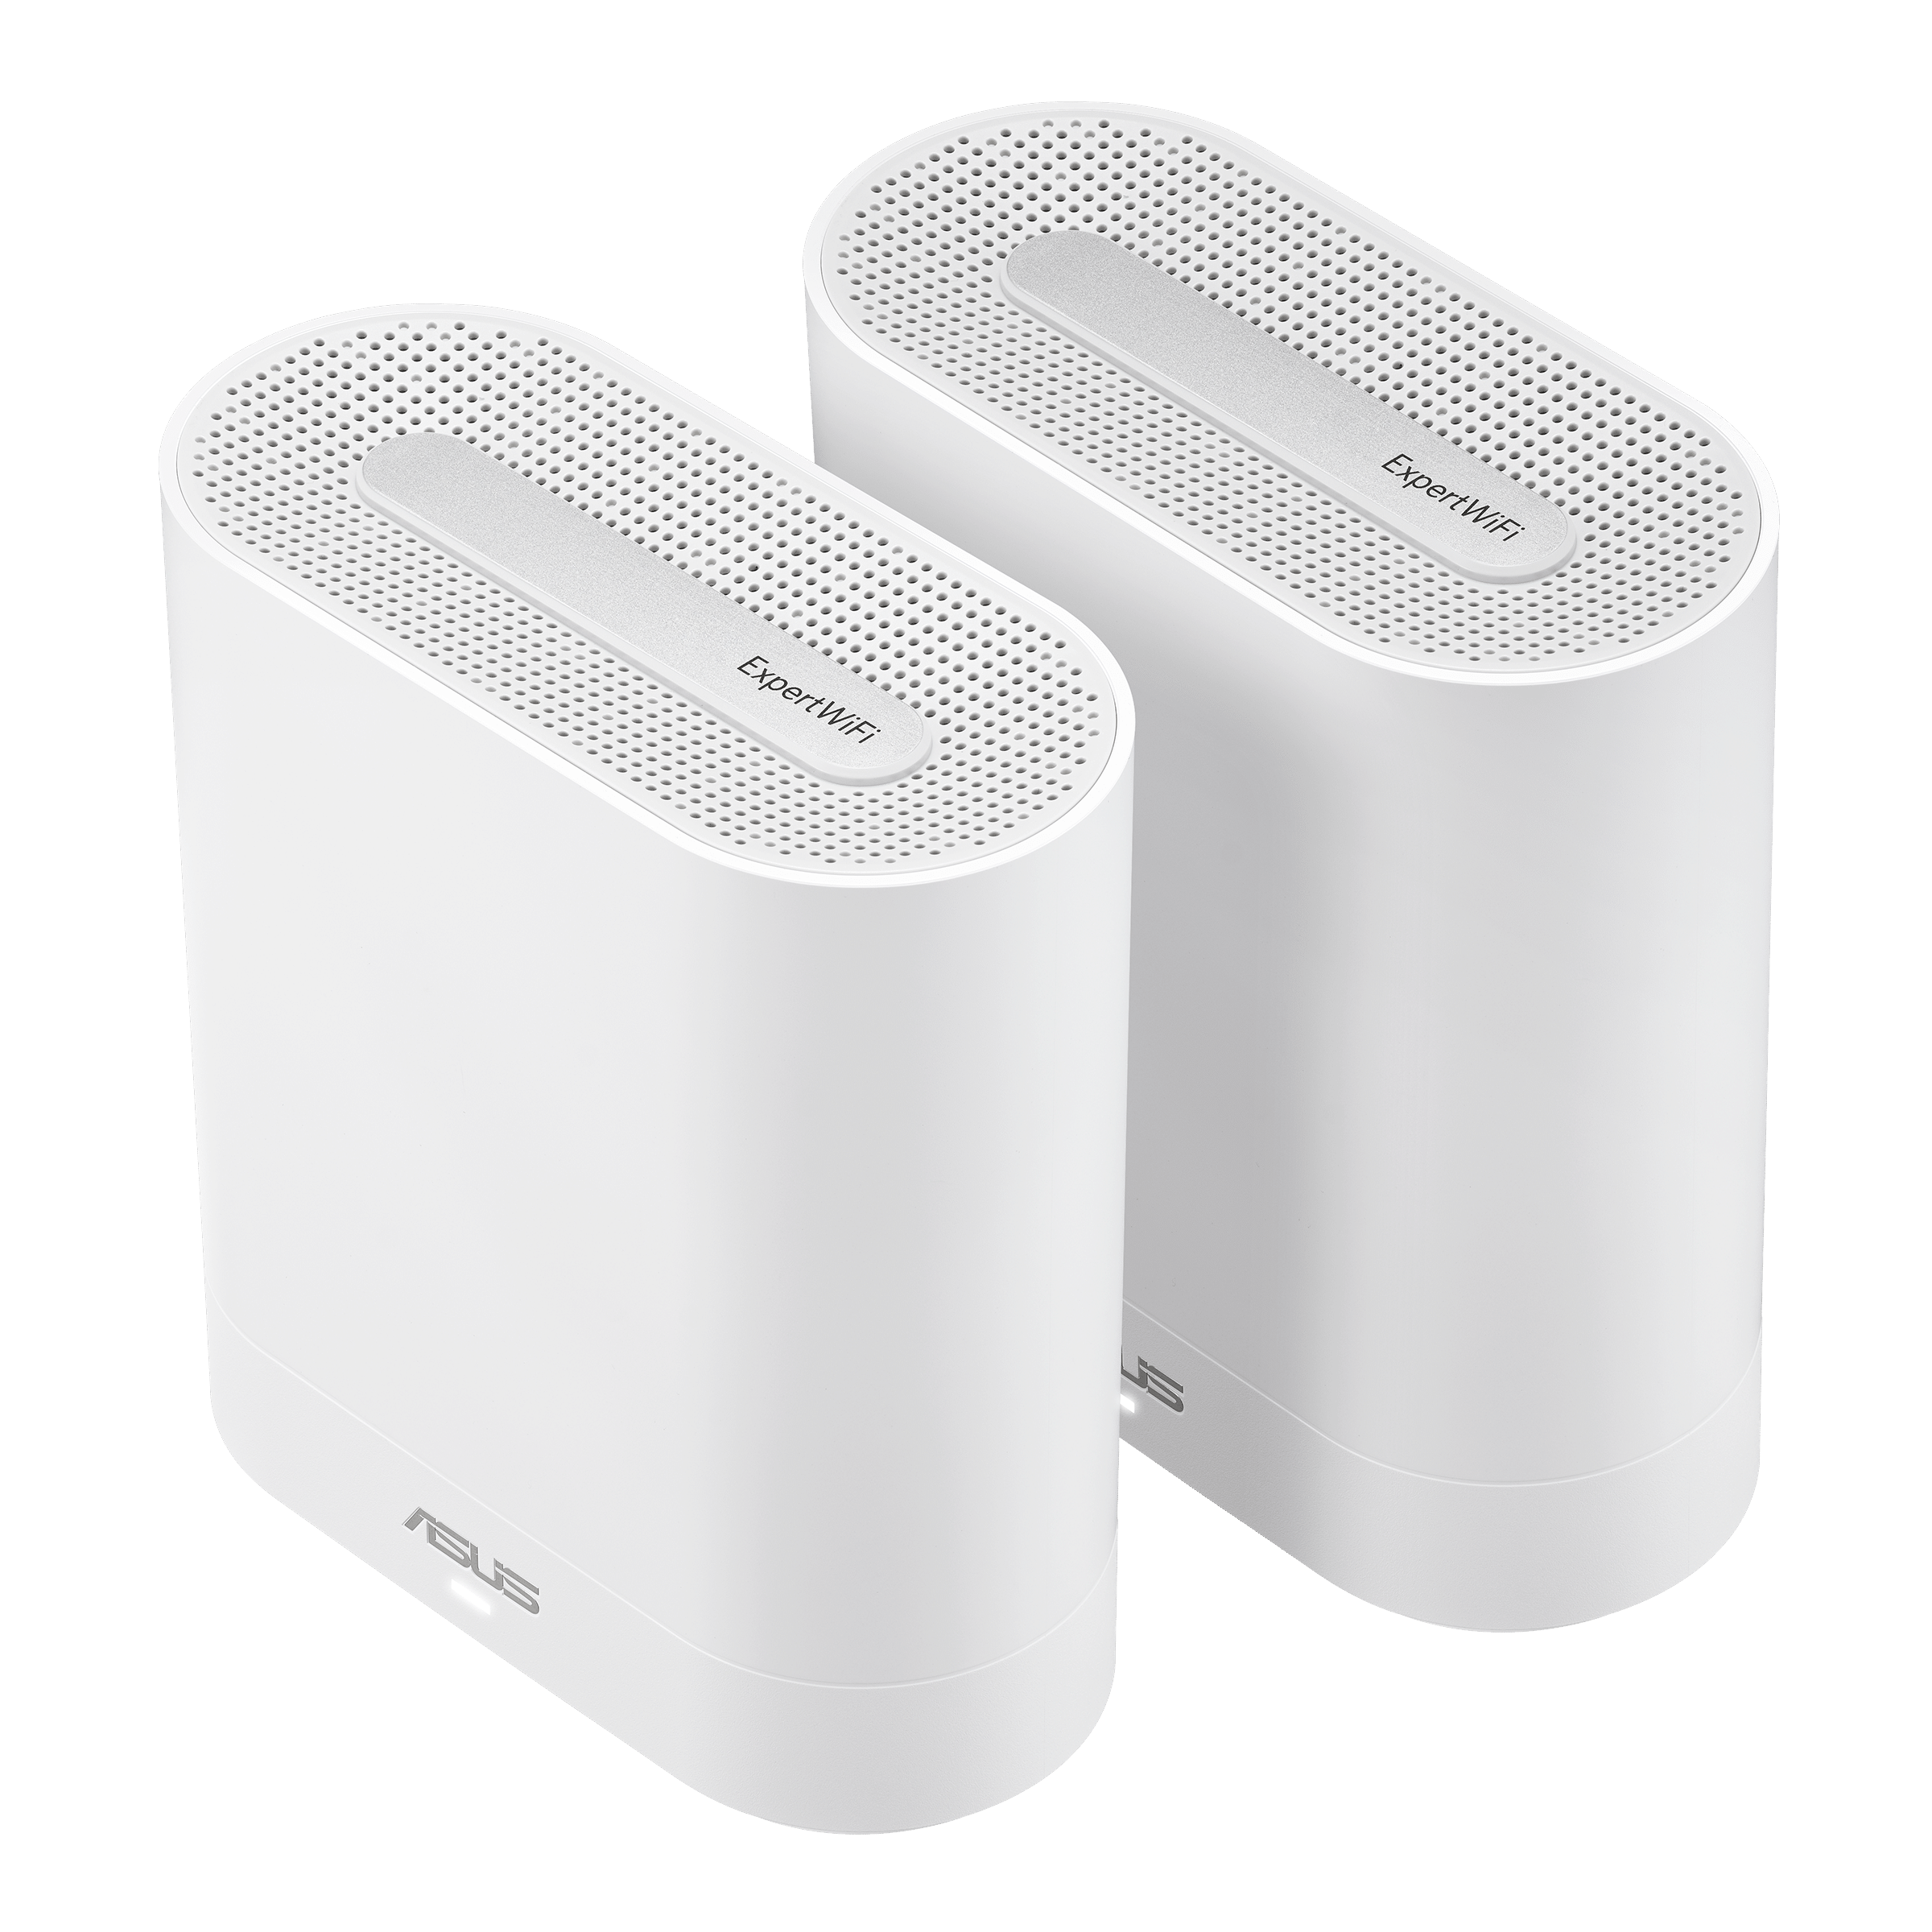 ASUS ExpertWiFi EBM68 AX7800 Tri-Band Wi-Fi 6 Business Mesh System (2 Pack)